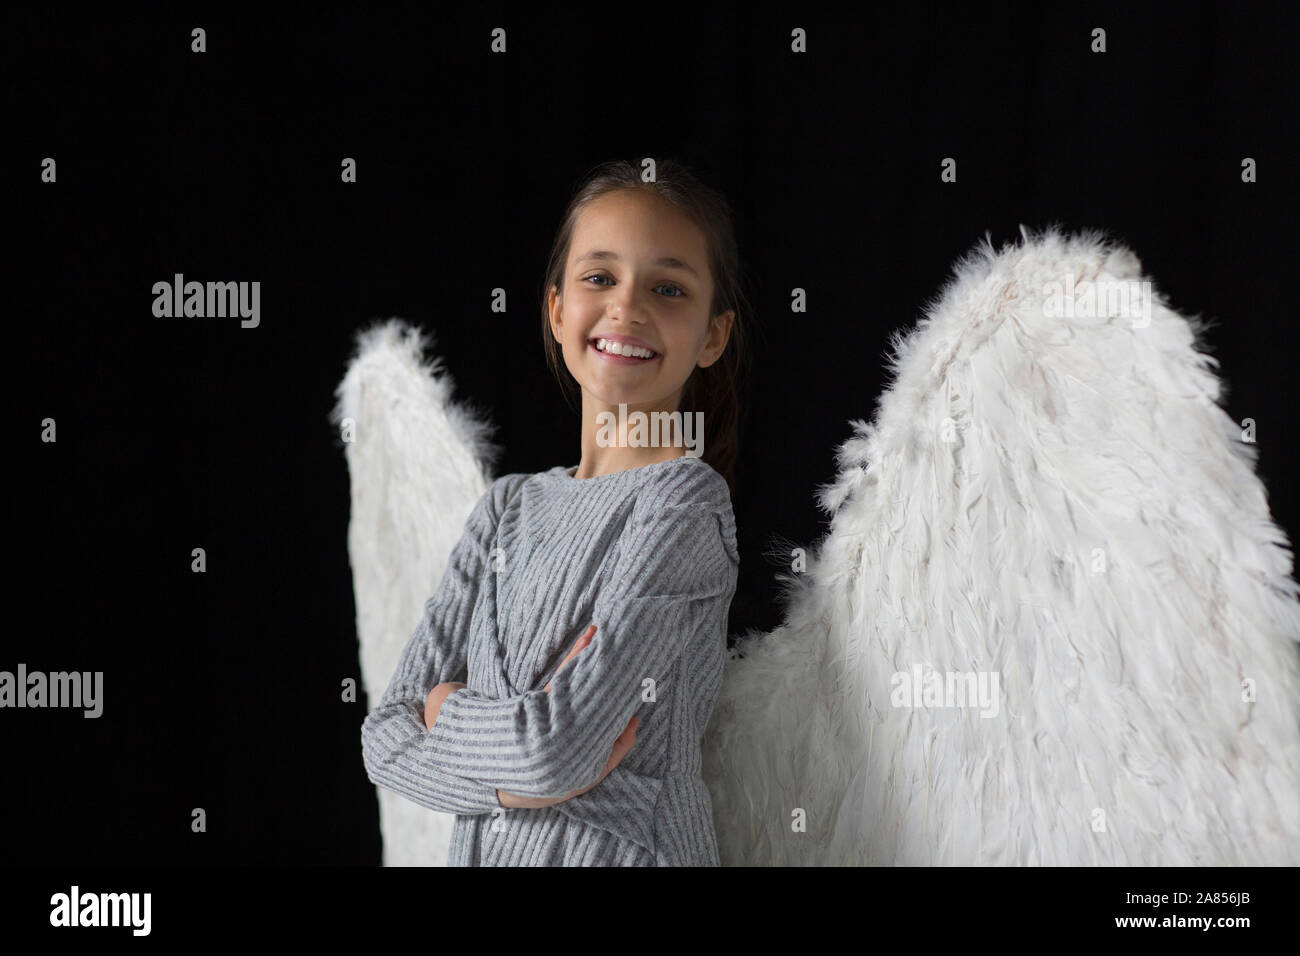 Portrait smiling, confident girl wearing angel wings Stock Photo